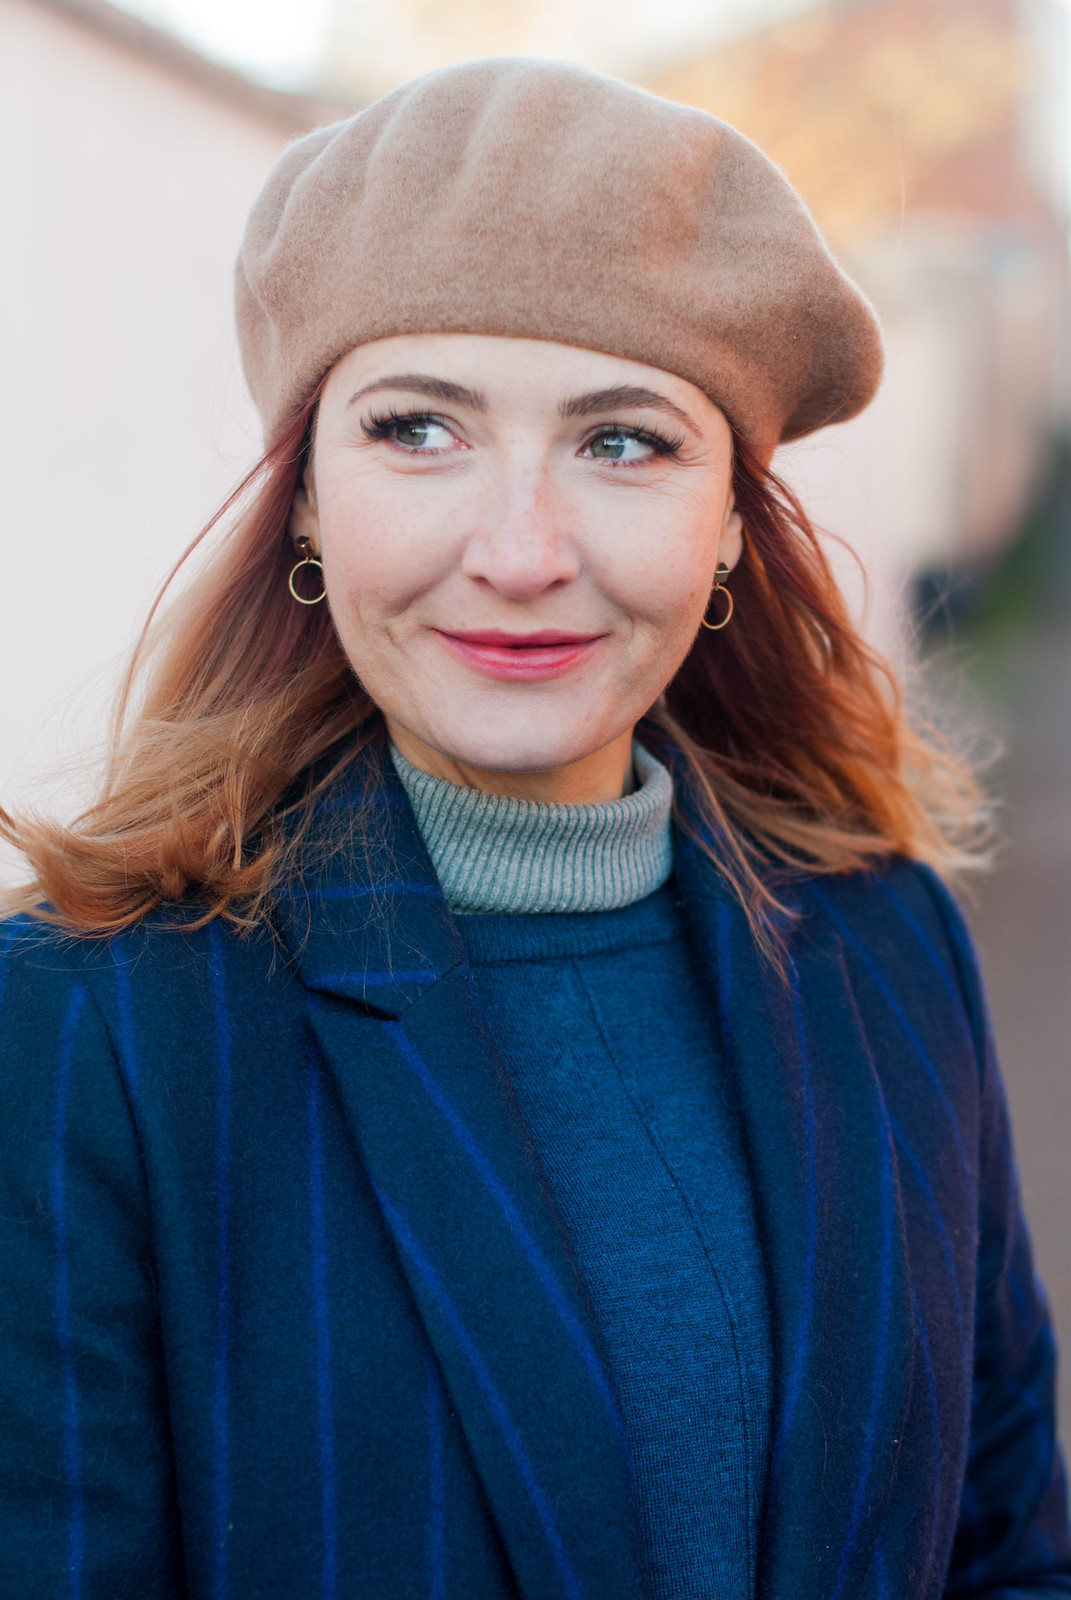 How to style a beret in winter: With a navy pinstripe wool coat, check trousers, a sweater dress and taupe lace ups | Not Dressed As Lamb, over 40 fashion blog